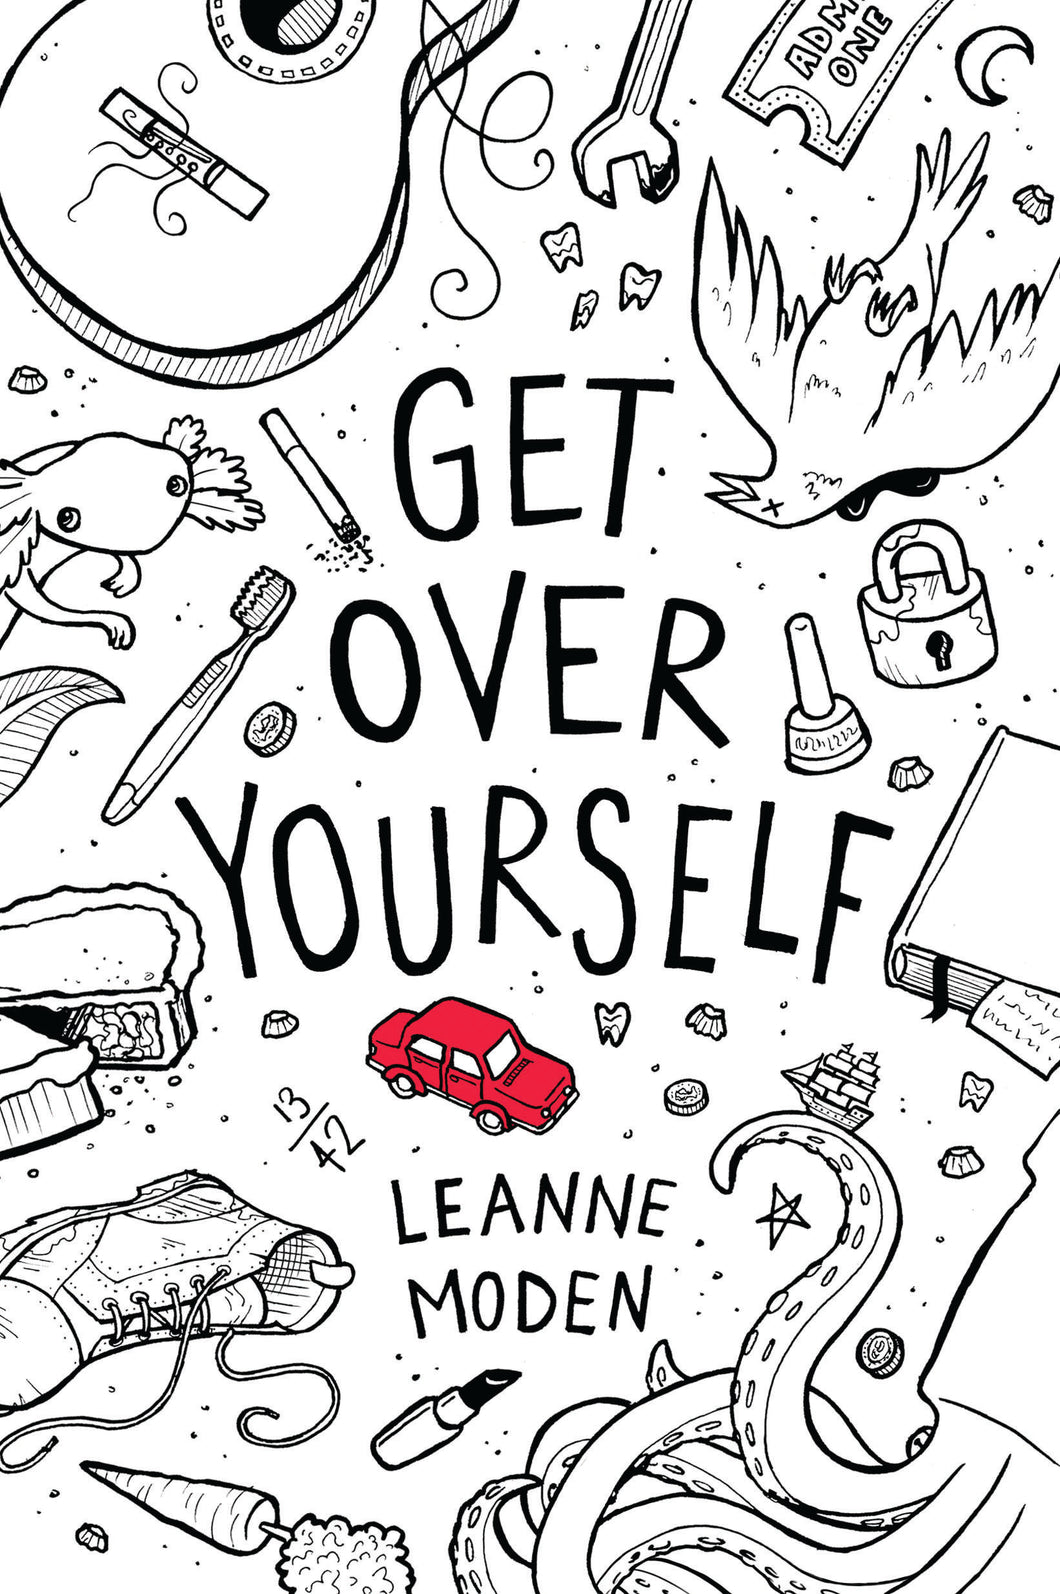 Get Over Yourself